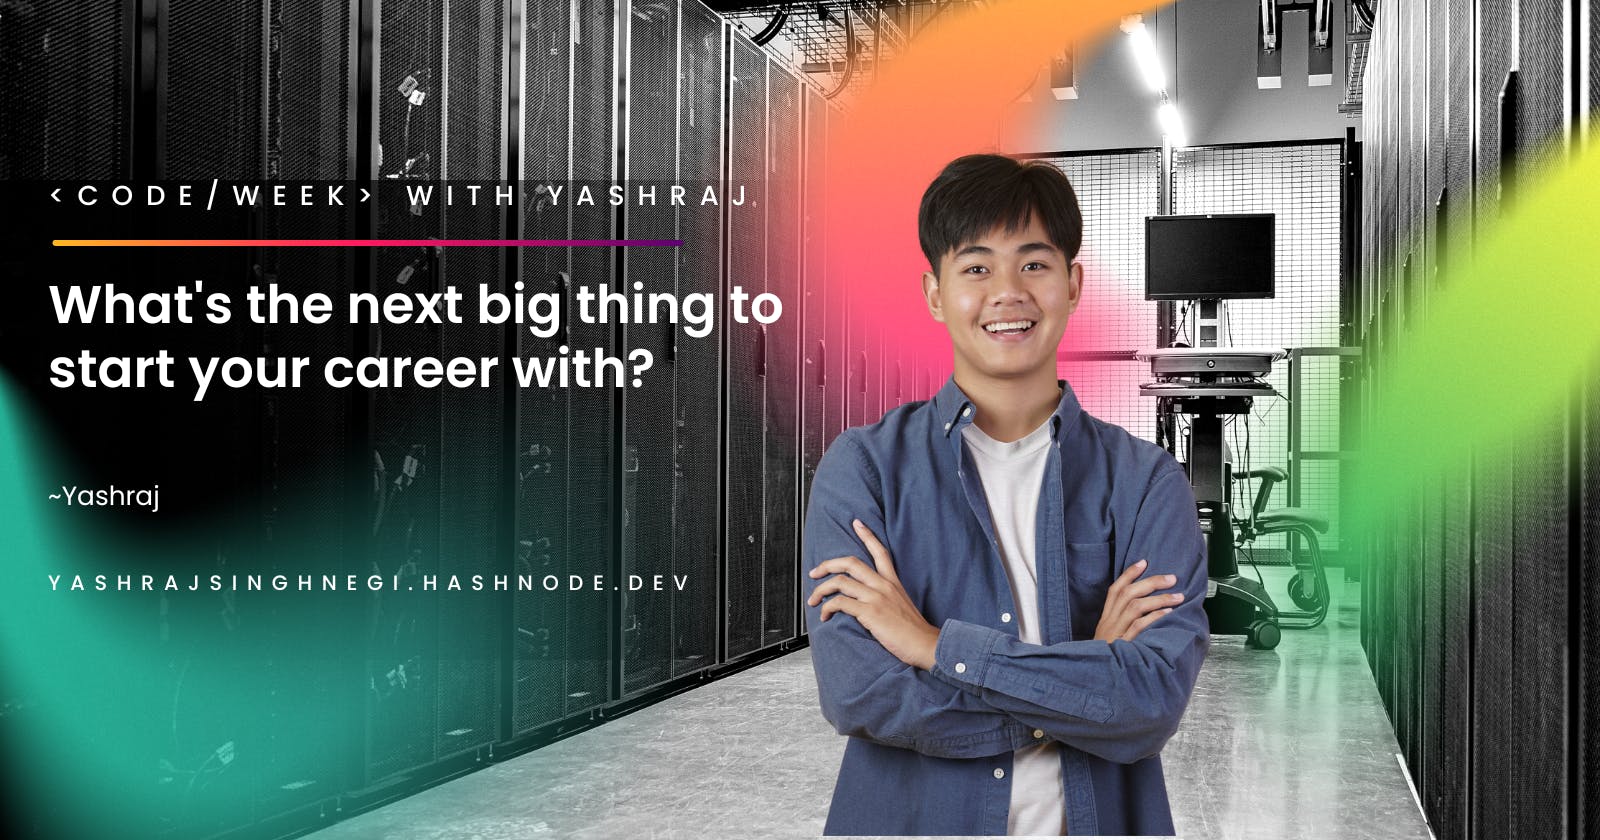 What's the next big thing to start your career with?